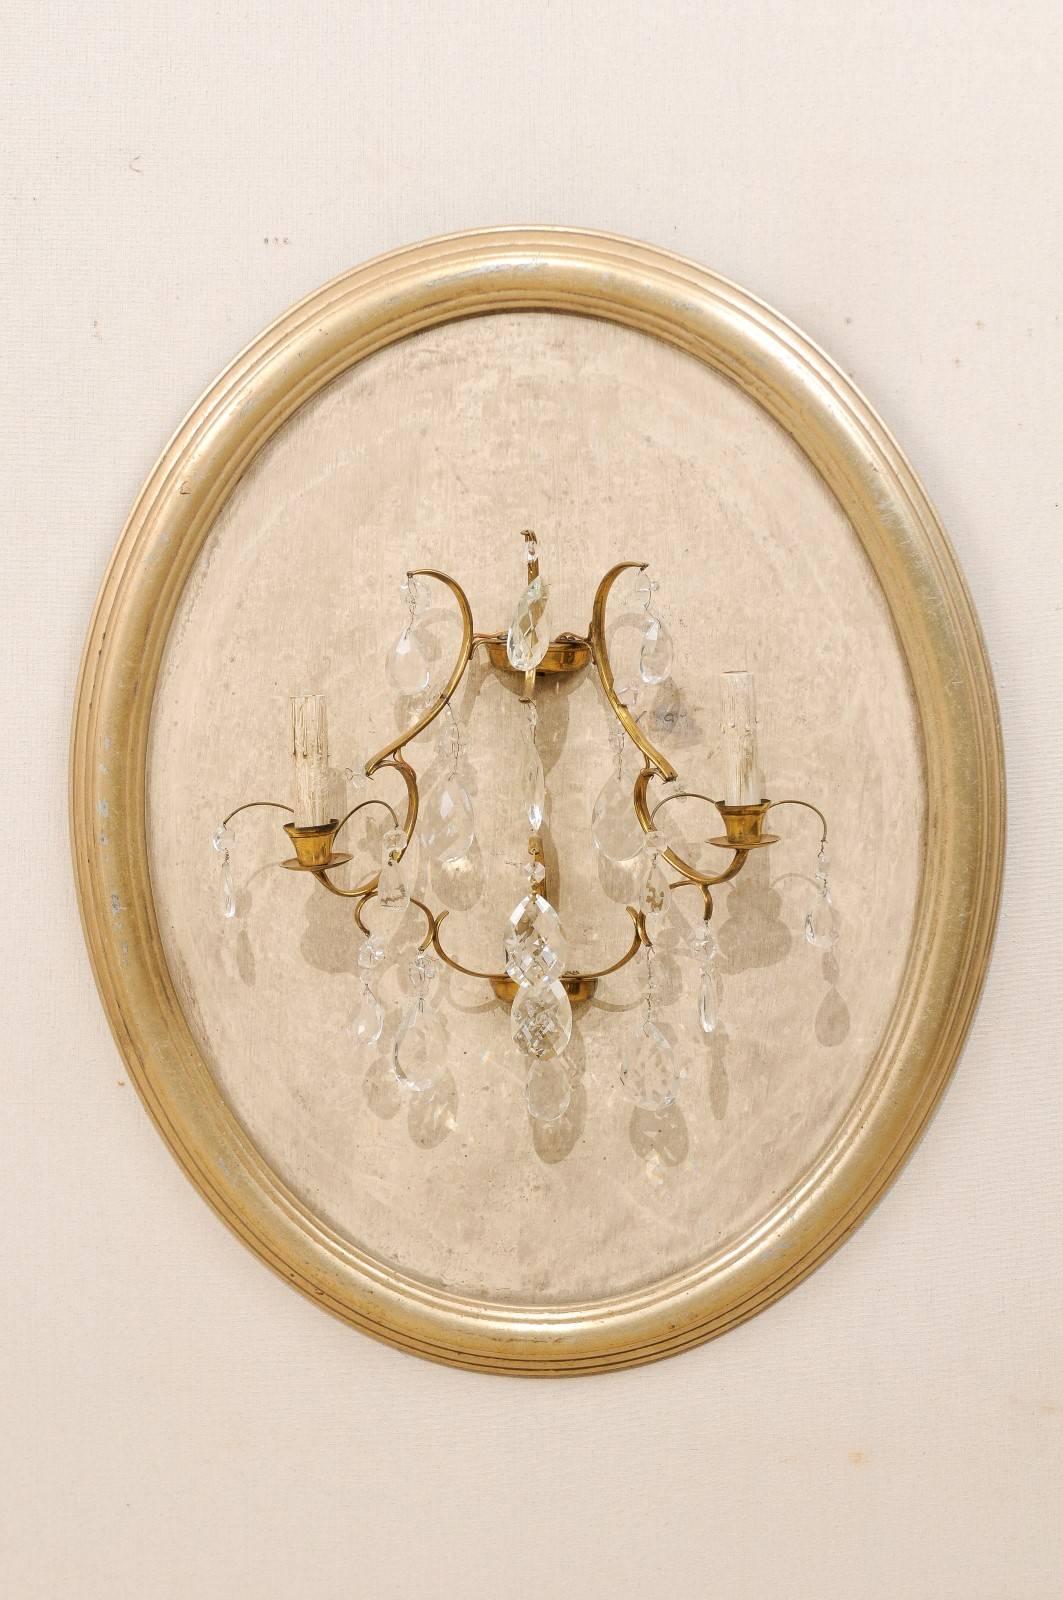 Painted Pair of Neutral Cream Colored Crystal Sconces on Oval Wood Plaques, Two-Light